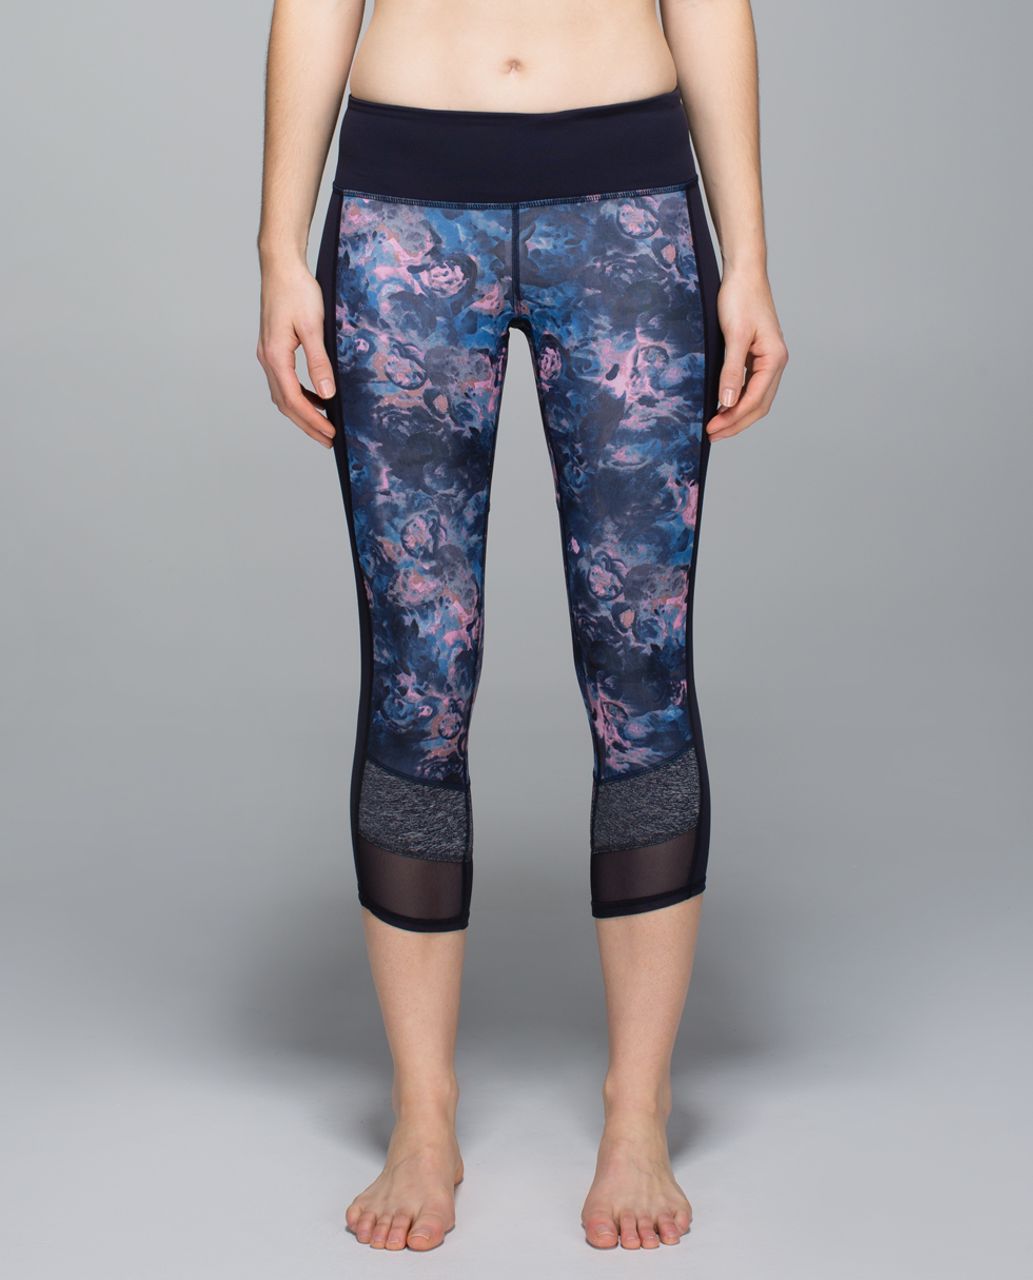 Lululemon If You're Lucky Crop *Full-On Luxtreme - Moody Mirage Bark Berry Deep Navy / Heathered Naval Blue / Naval Blue